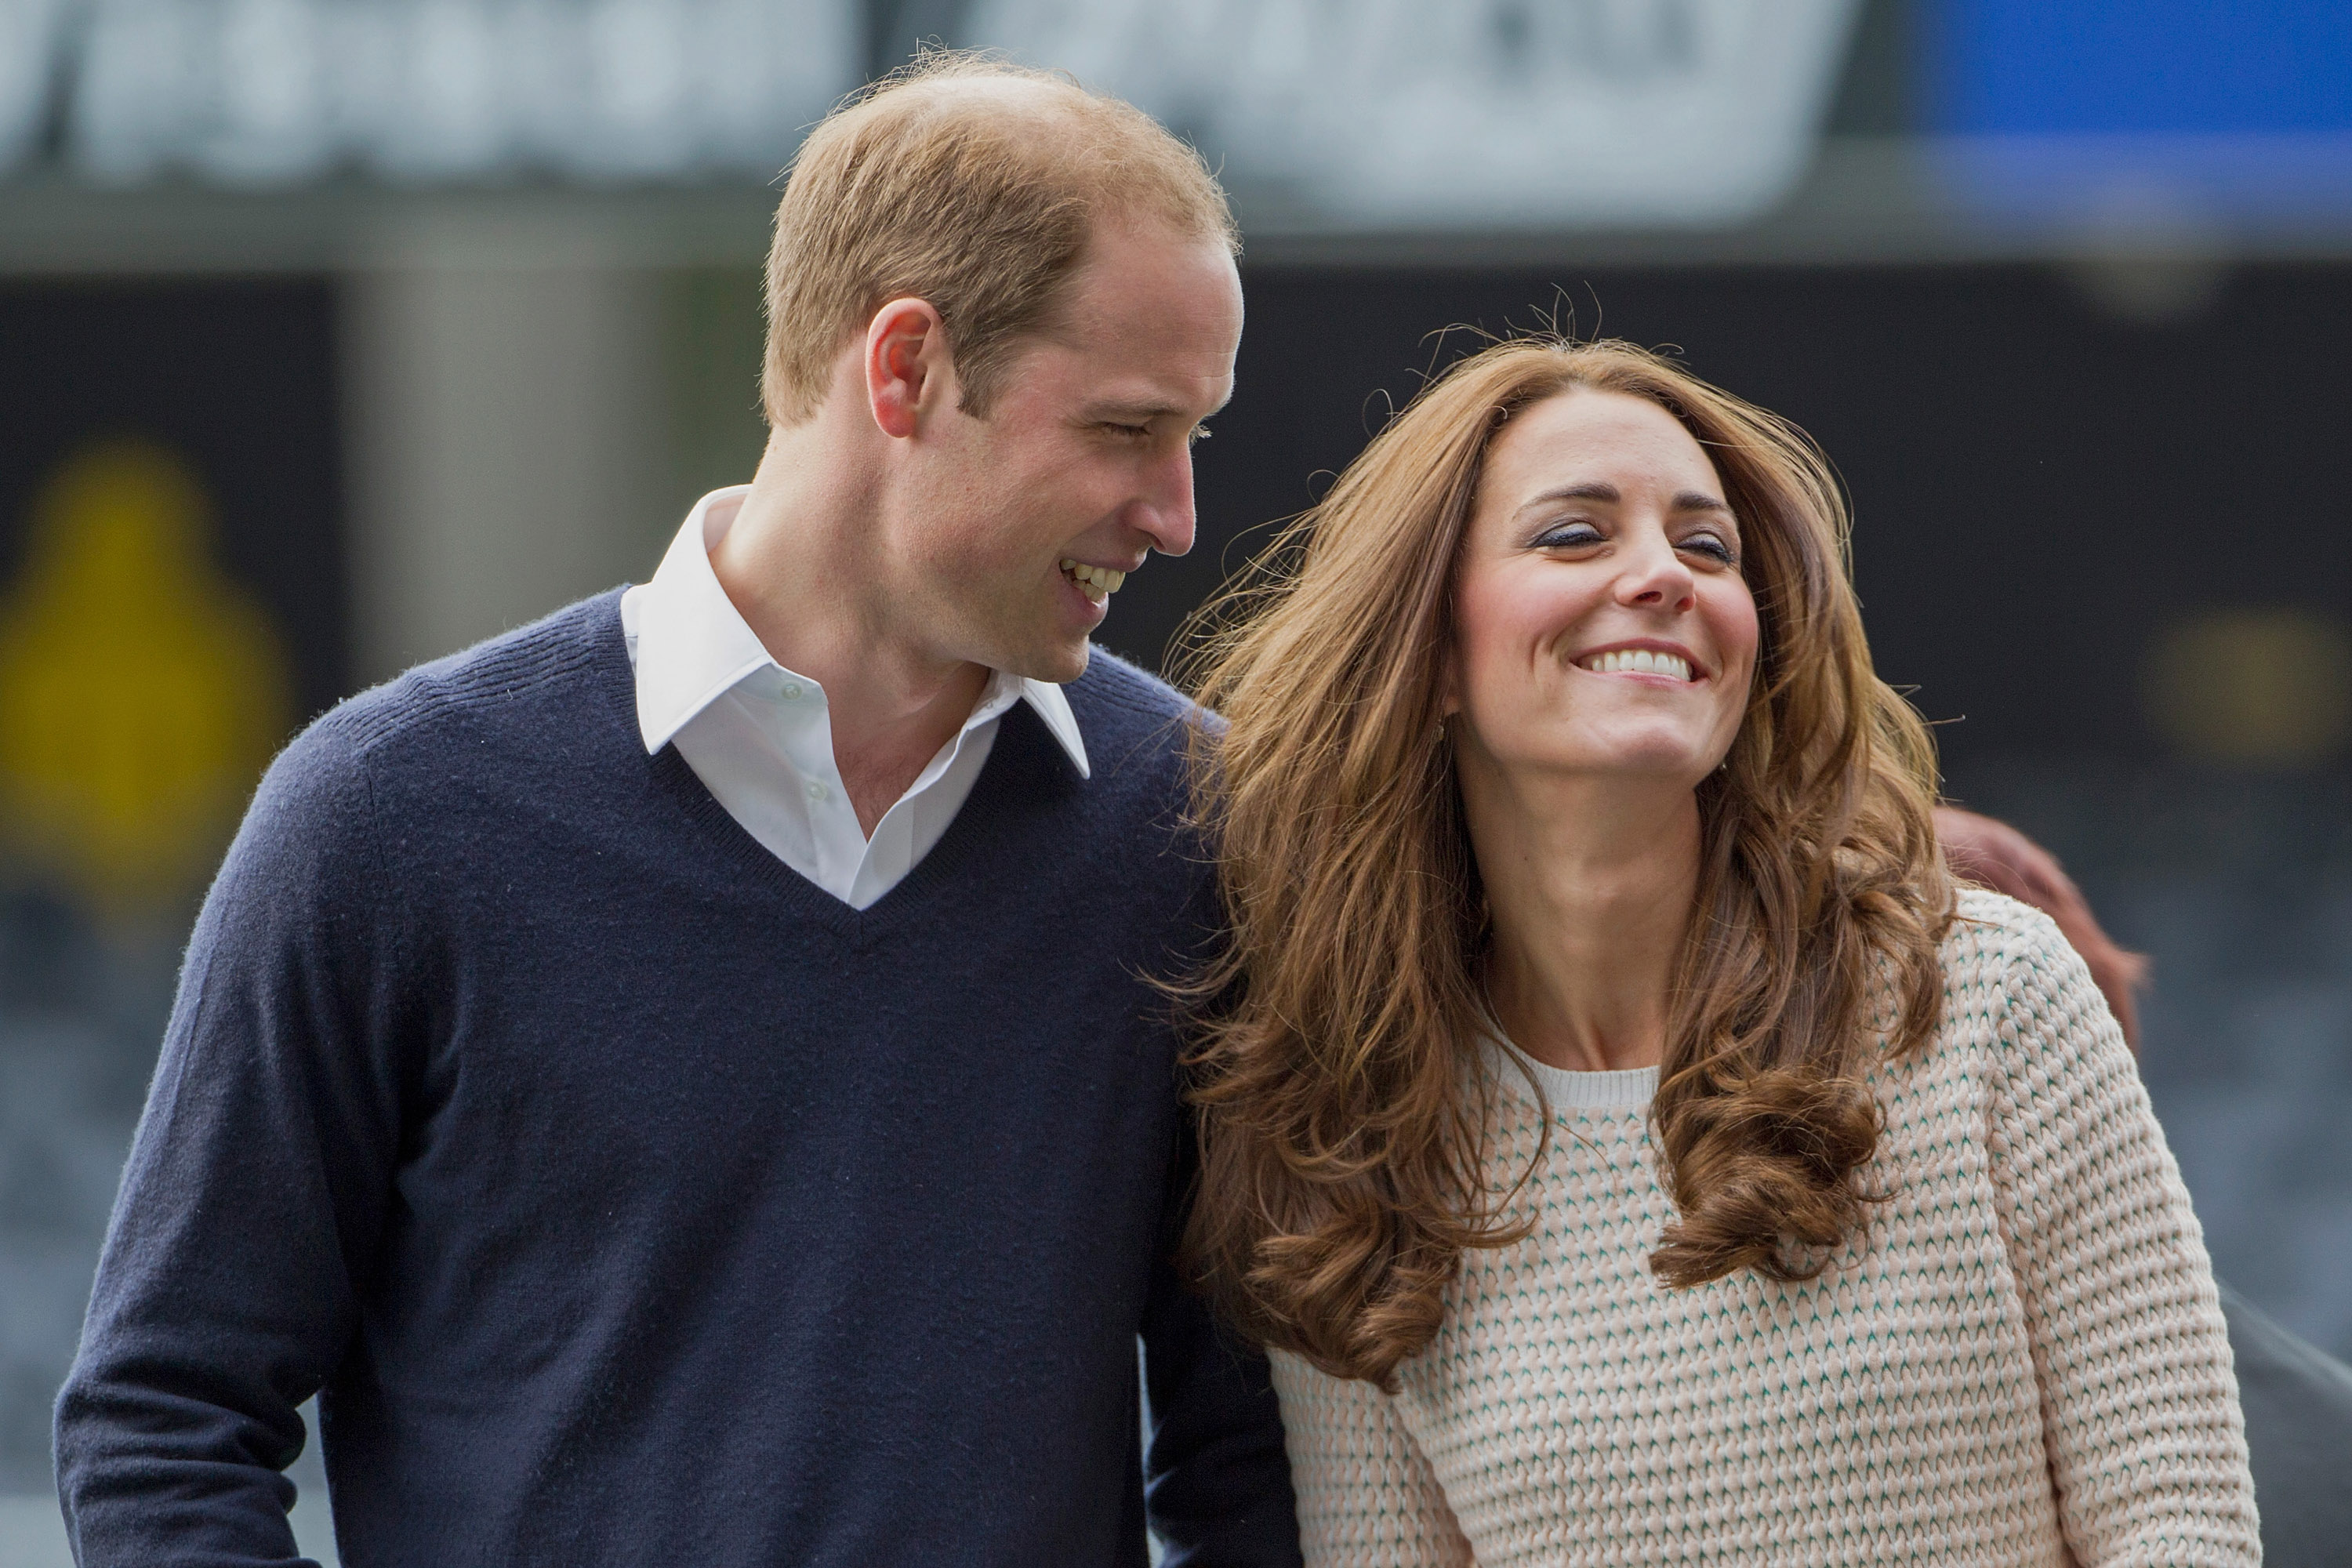 Prince William and Kate Middleton smile and walk together